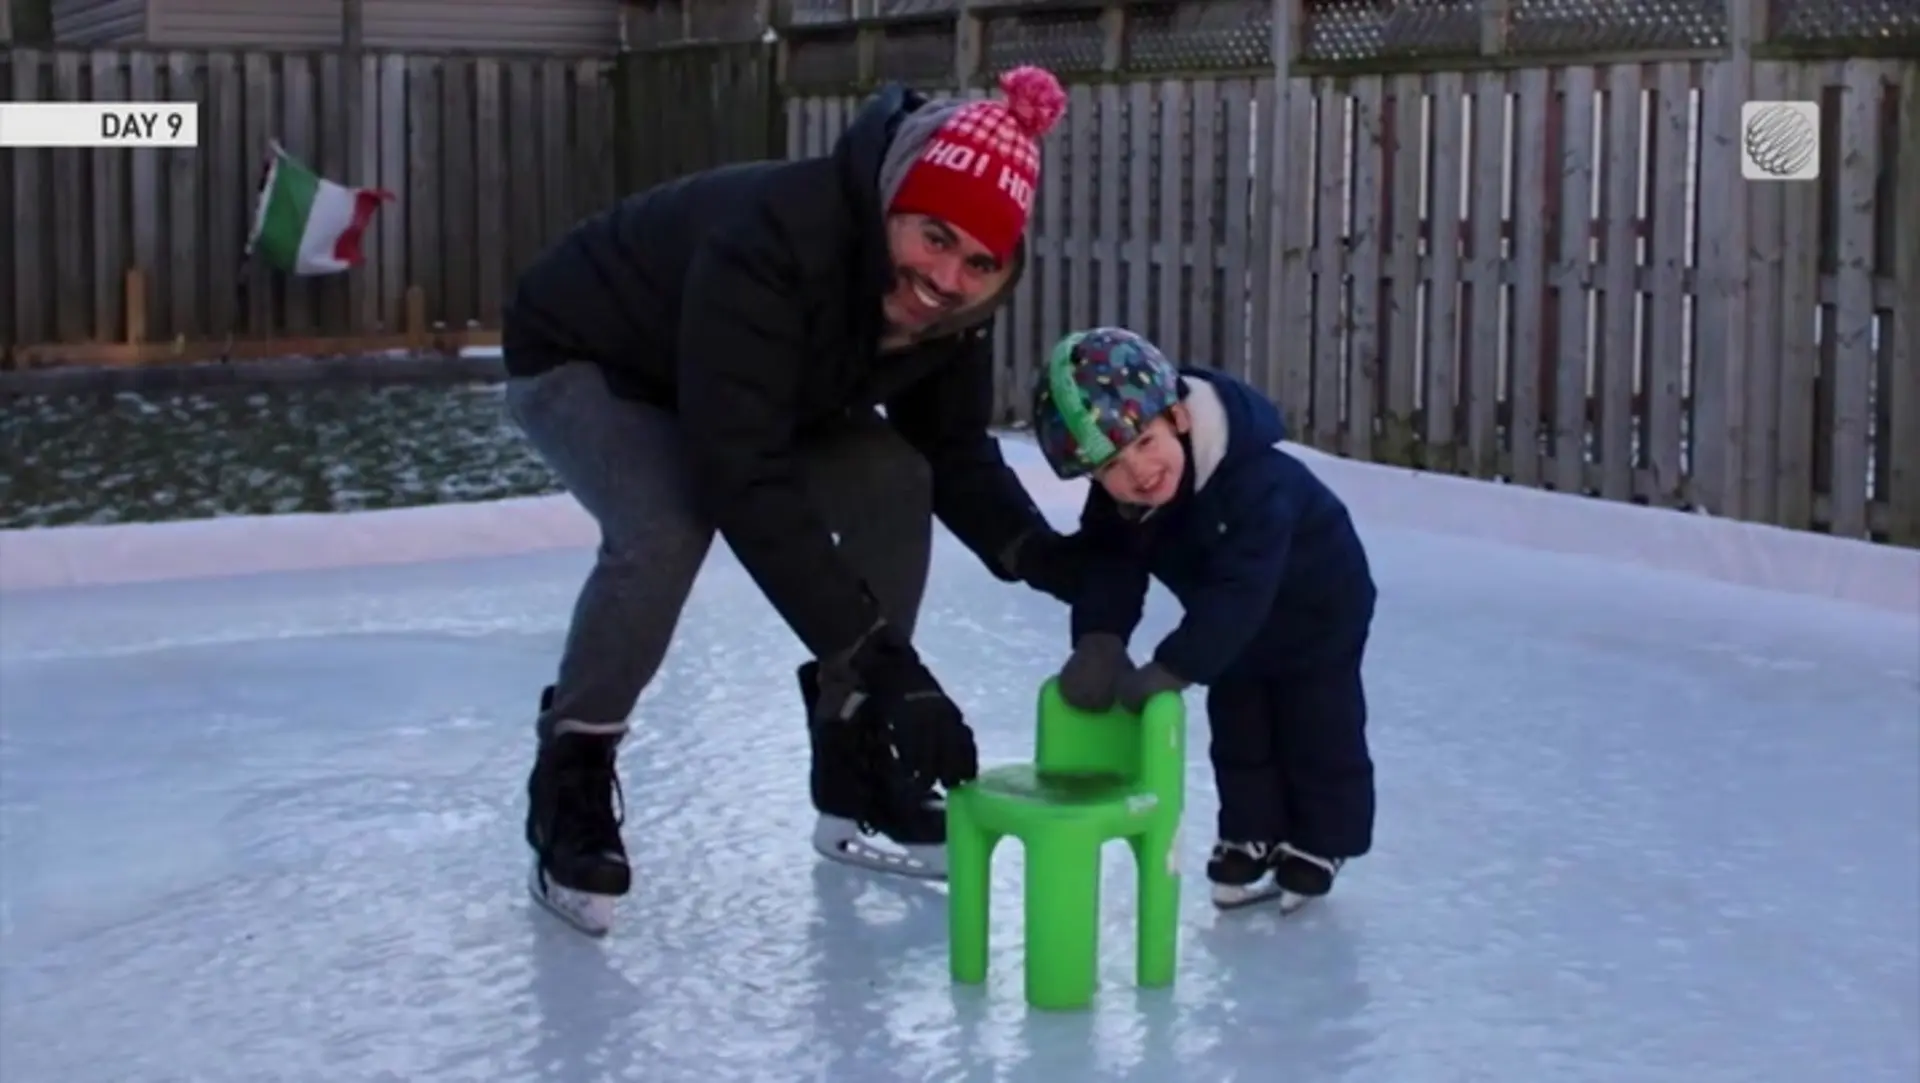 Want to build a backyard rink? Here's a look at the process